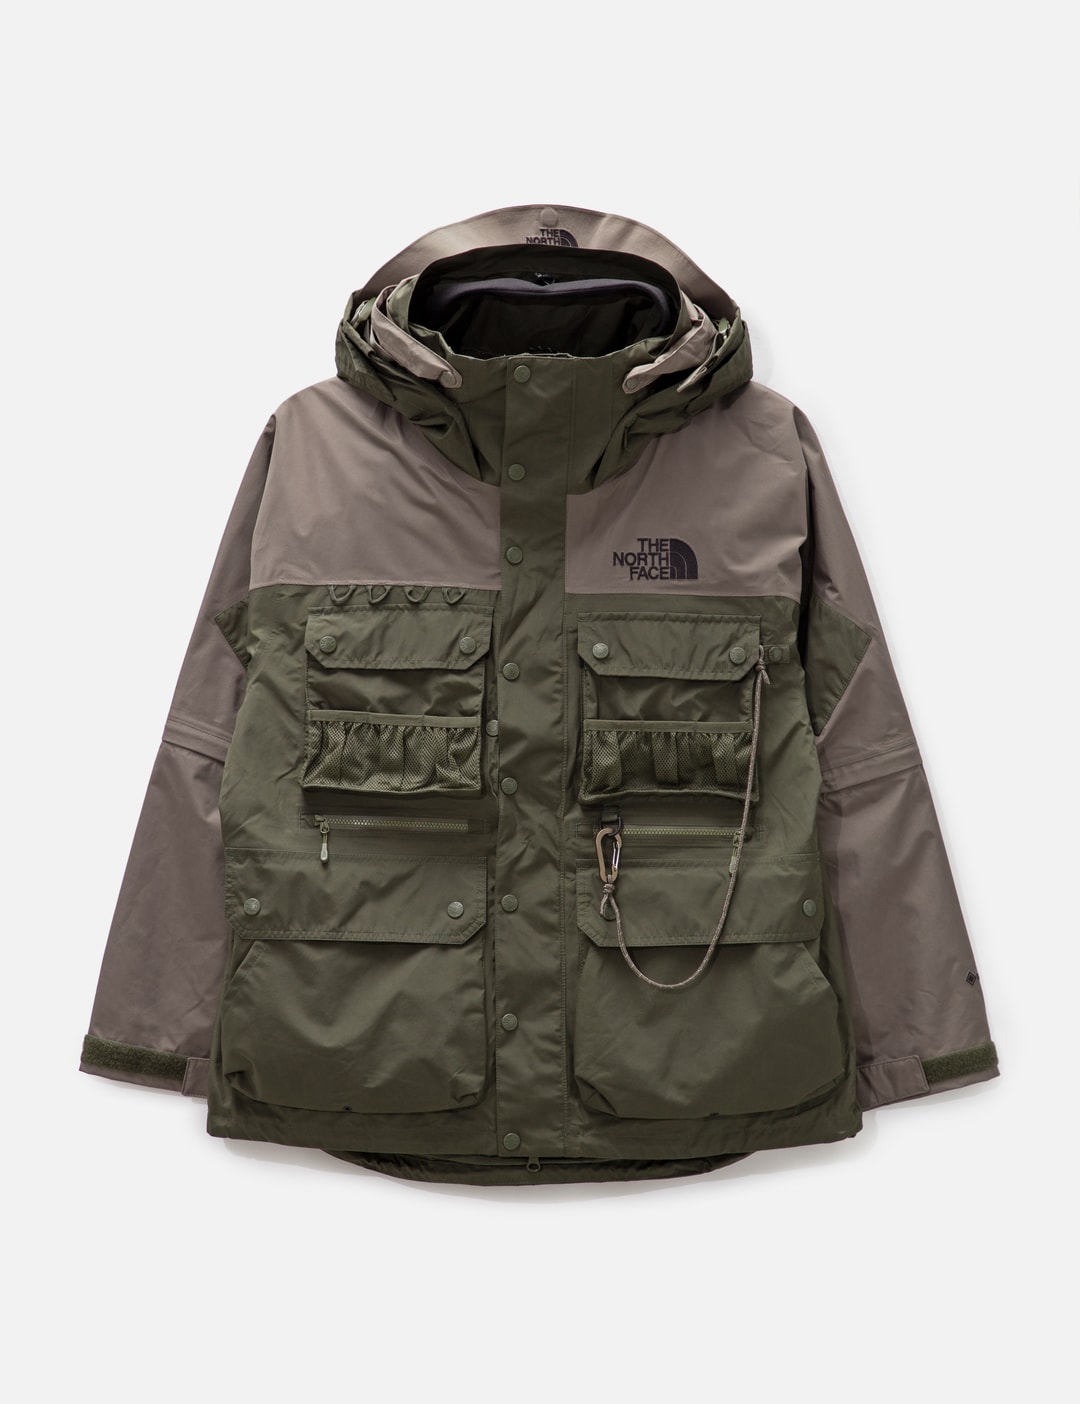 The North Face - GORE-TEX Outdoor Jacket | HBX - Globally Curated ...